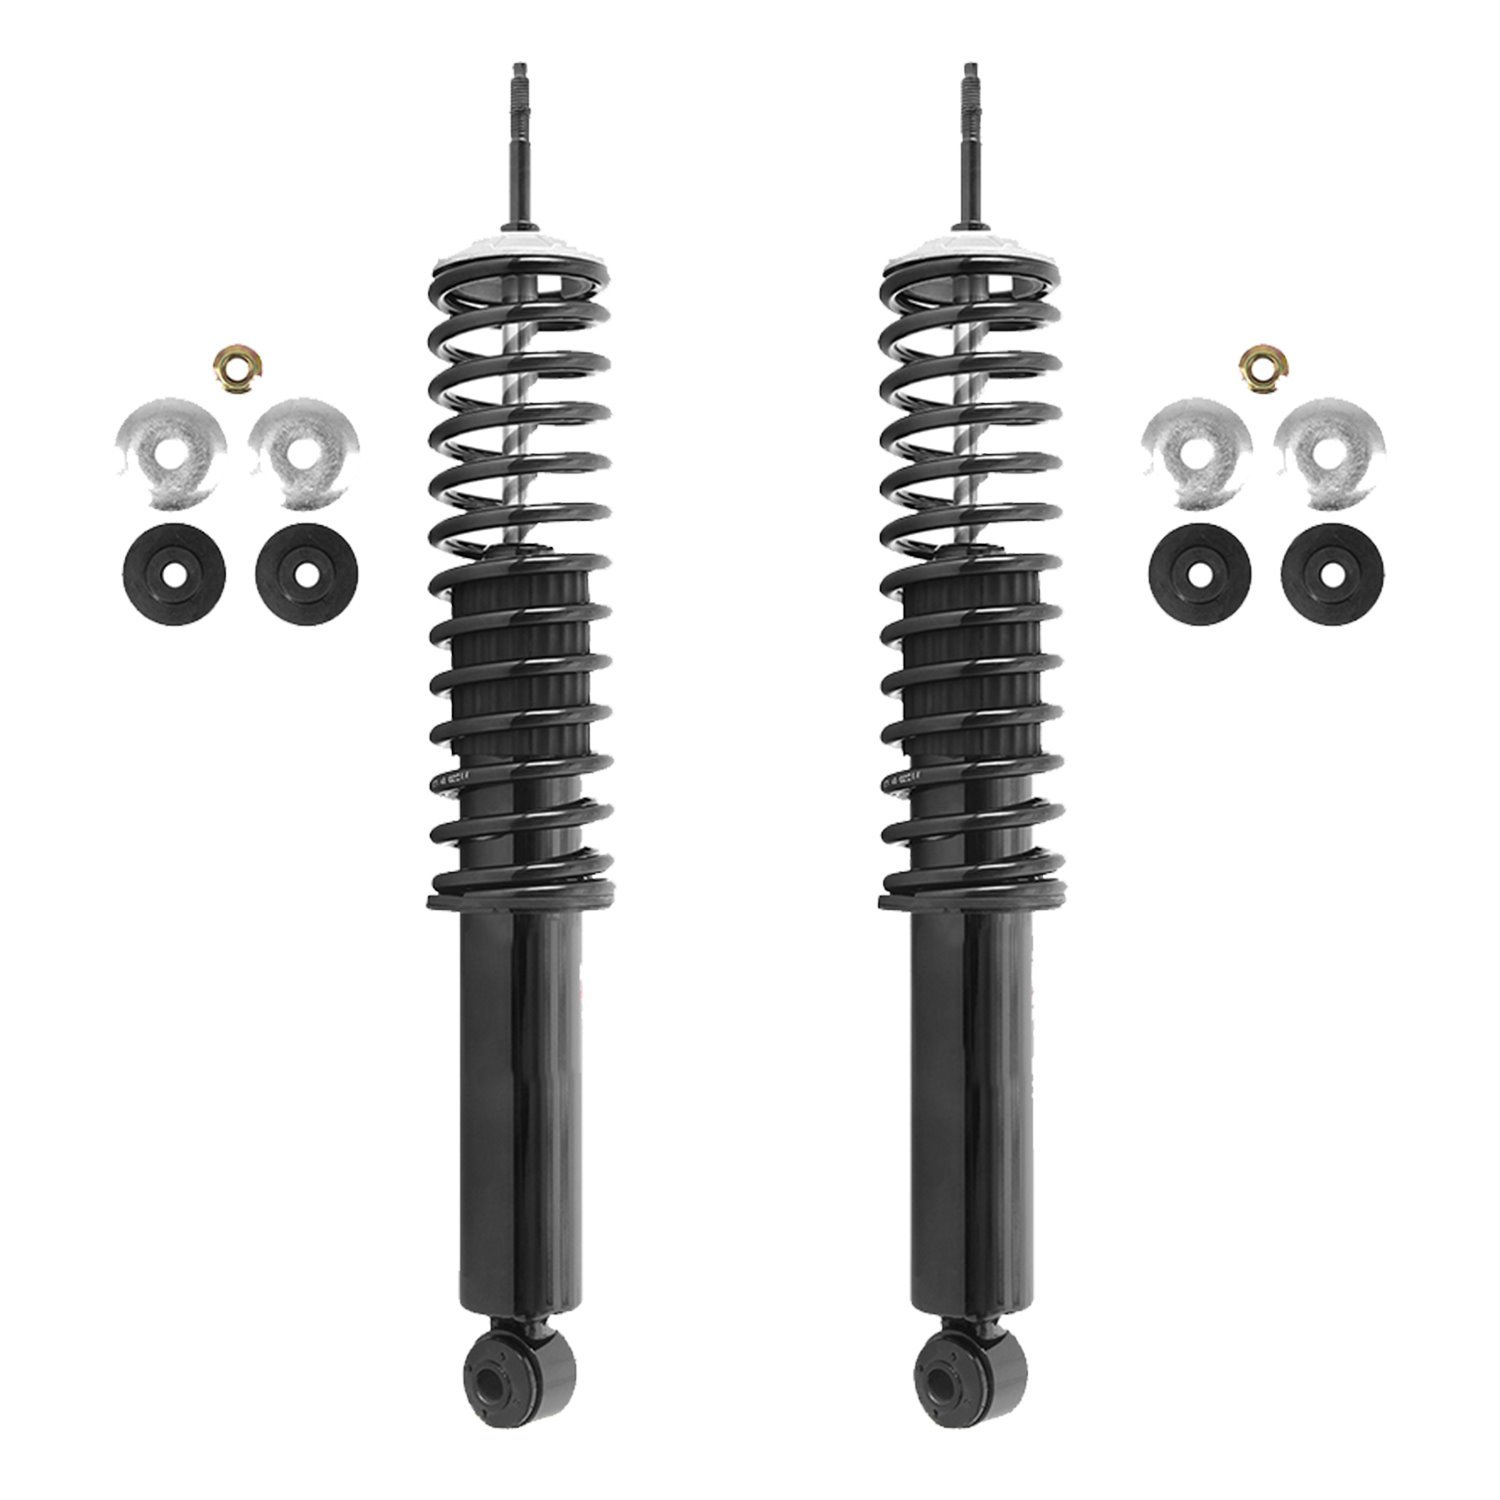 60001c Shock Absorber Conversion Kit, Front Fits Select Ford Expedition, Lincoln Navigator